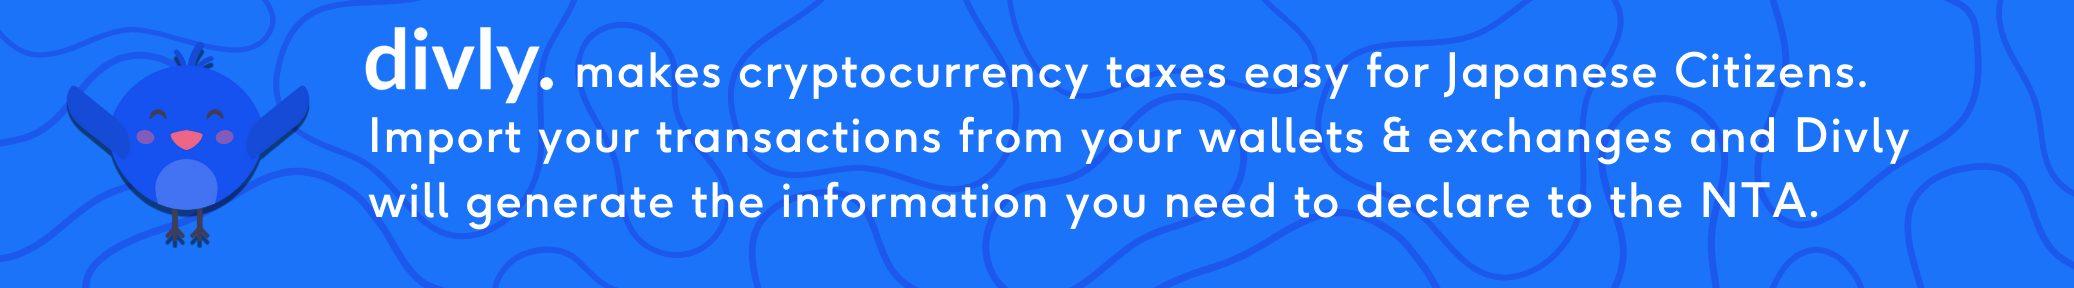 Divly makes crypto taxes easy for Japanese citizens. Import transactions from your wallets & exchanges and Divly will generate the information required to declare to the NTA